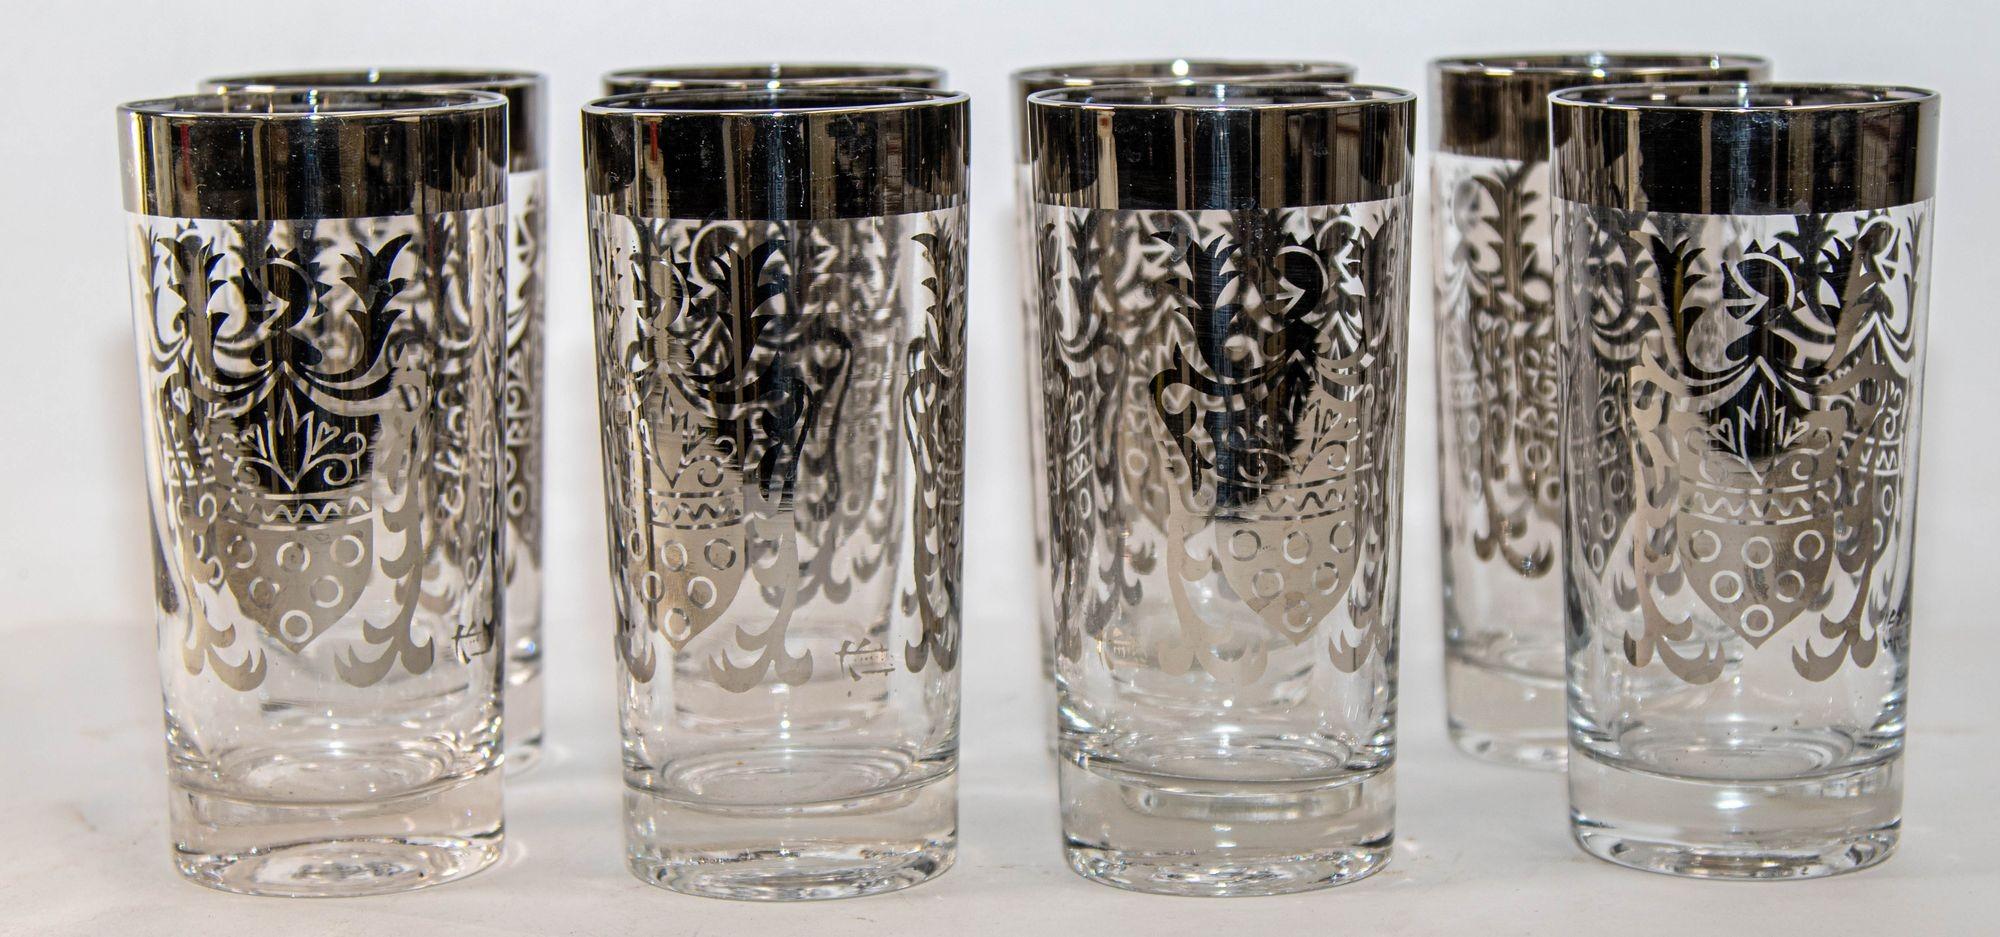 Vintage Kimiko Signed Silver High Ball Glasses Set of 8 with Carrying Caddy 60's en vente 13